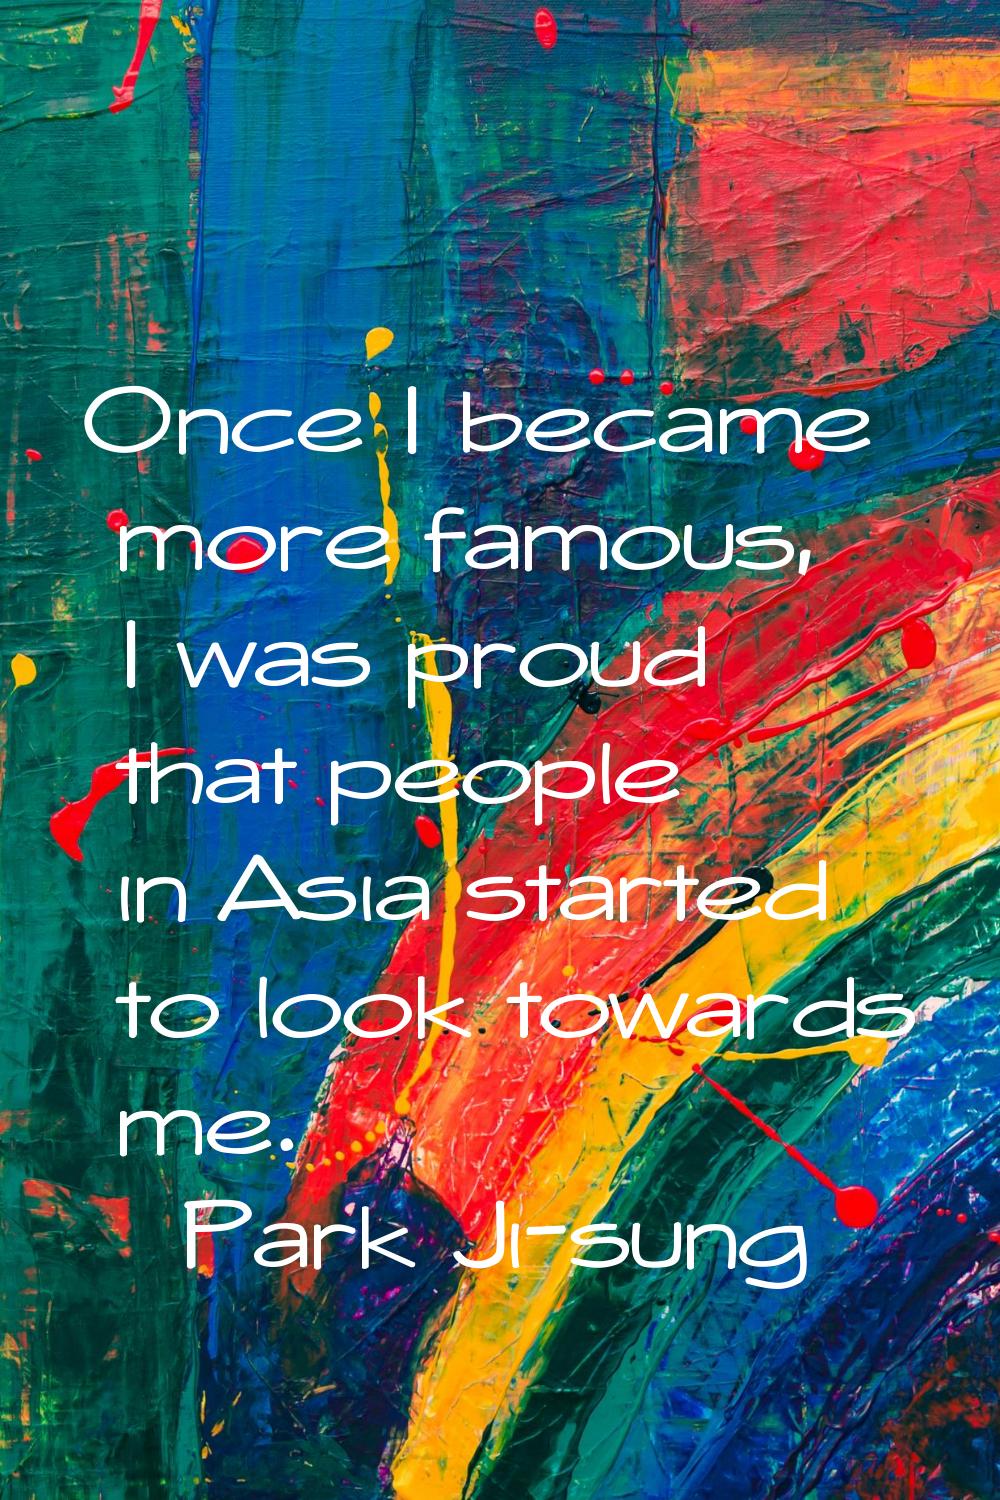 Once I became more famous, I was proud that people in Asia started to look towards me.